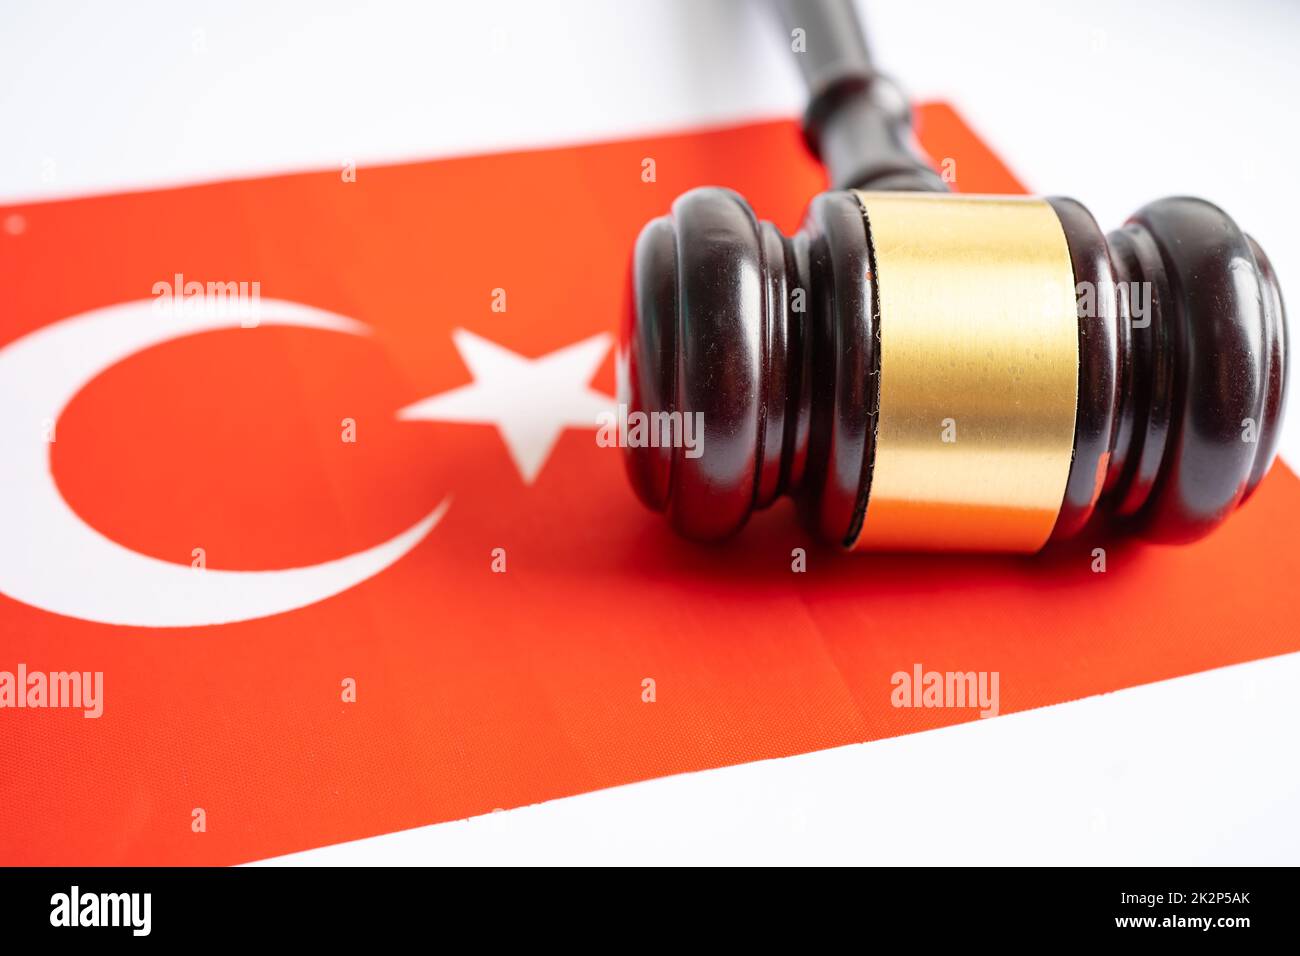 Turkey flag with gavel for judge lawyer. Law and justice court concept. Stock Photo